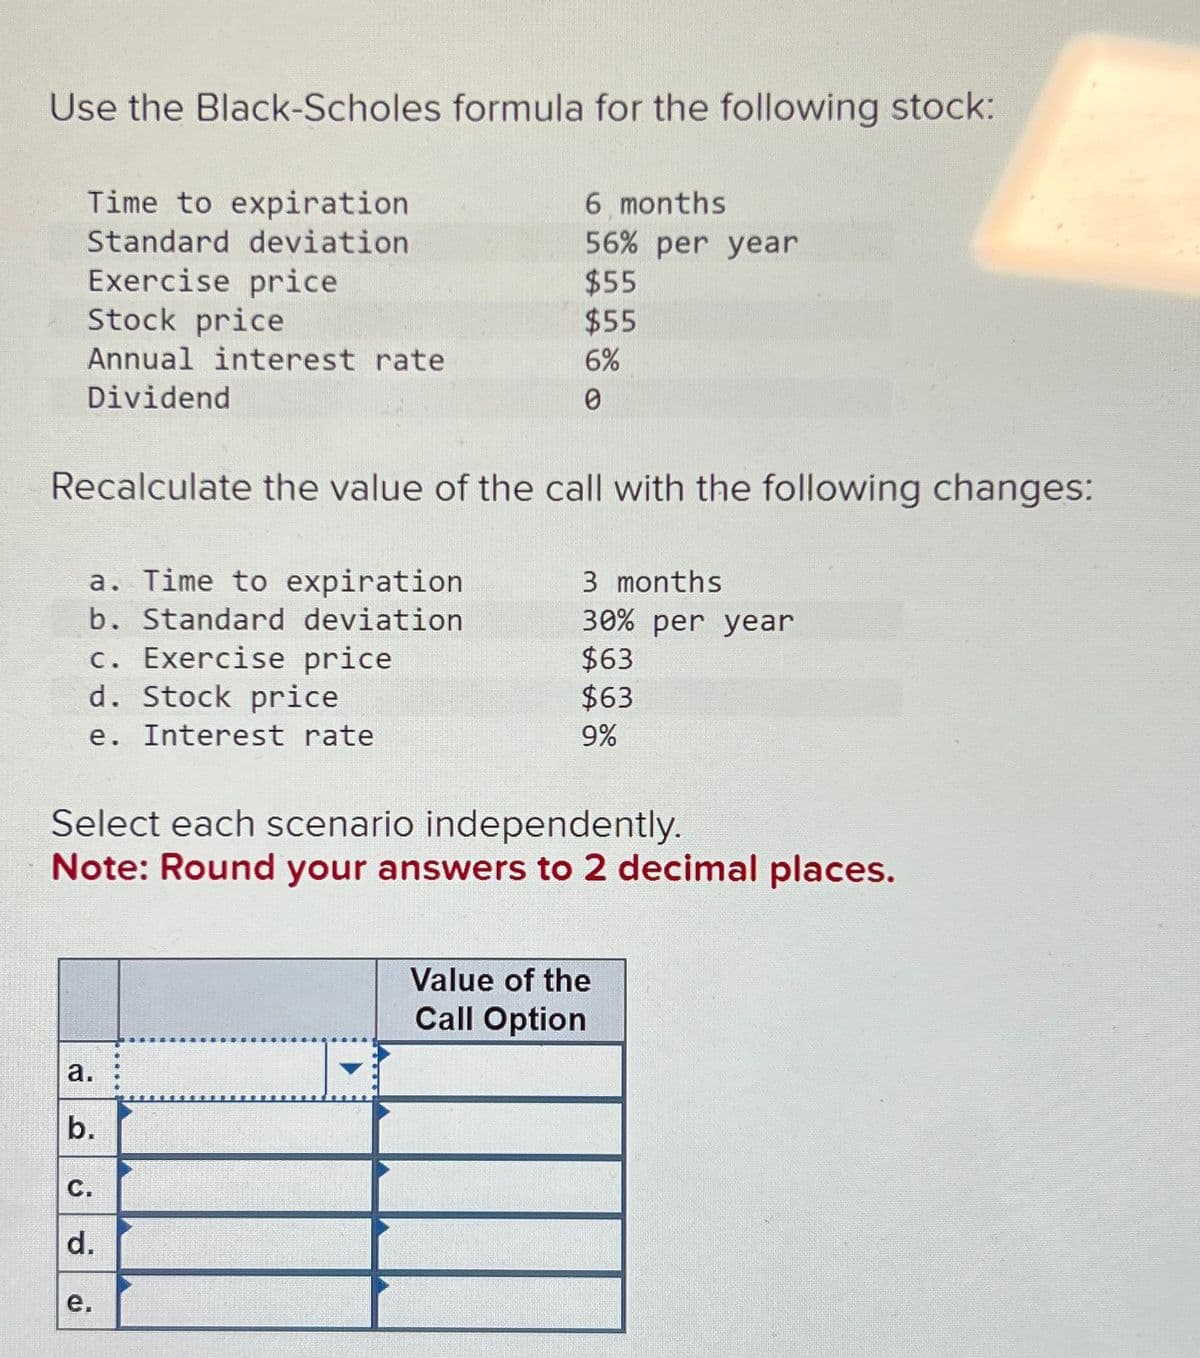 Use the Black-Scholes formula for the following stock:
Time to expiration.
6 months
Standard deviation
56% per year
Exercise price
$55
Stock price
$55
Annual interest rate
6%
Dividend
0
Recalculate the value of the call with the following changes:
a. Time to expiration
b. Standard deviation
c. Exercise price
d. Stock price
e.
Interest rate
3 months
30% per year
$63
$63
9%
Select each scenario independently.
Note: Round your answers to 2 decimal places.
a.
b.
C.
d.
نه
Value of the
Call Option